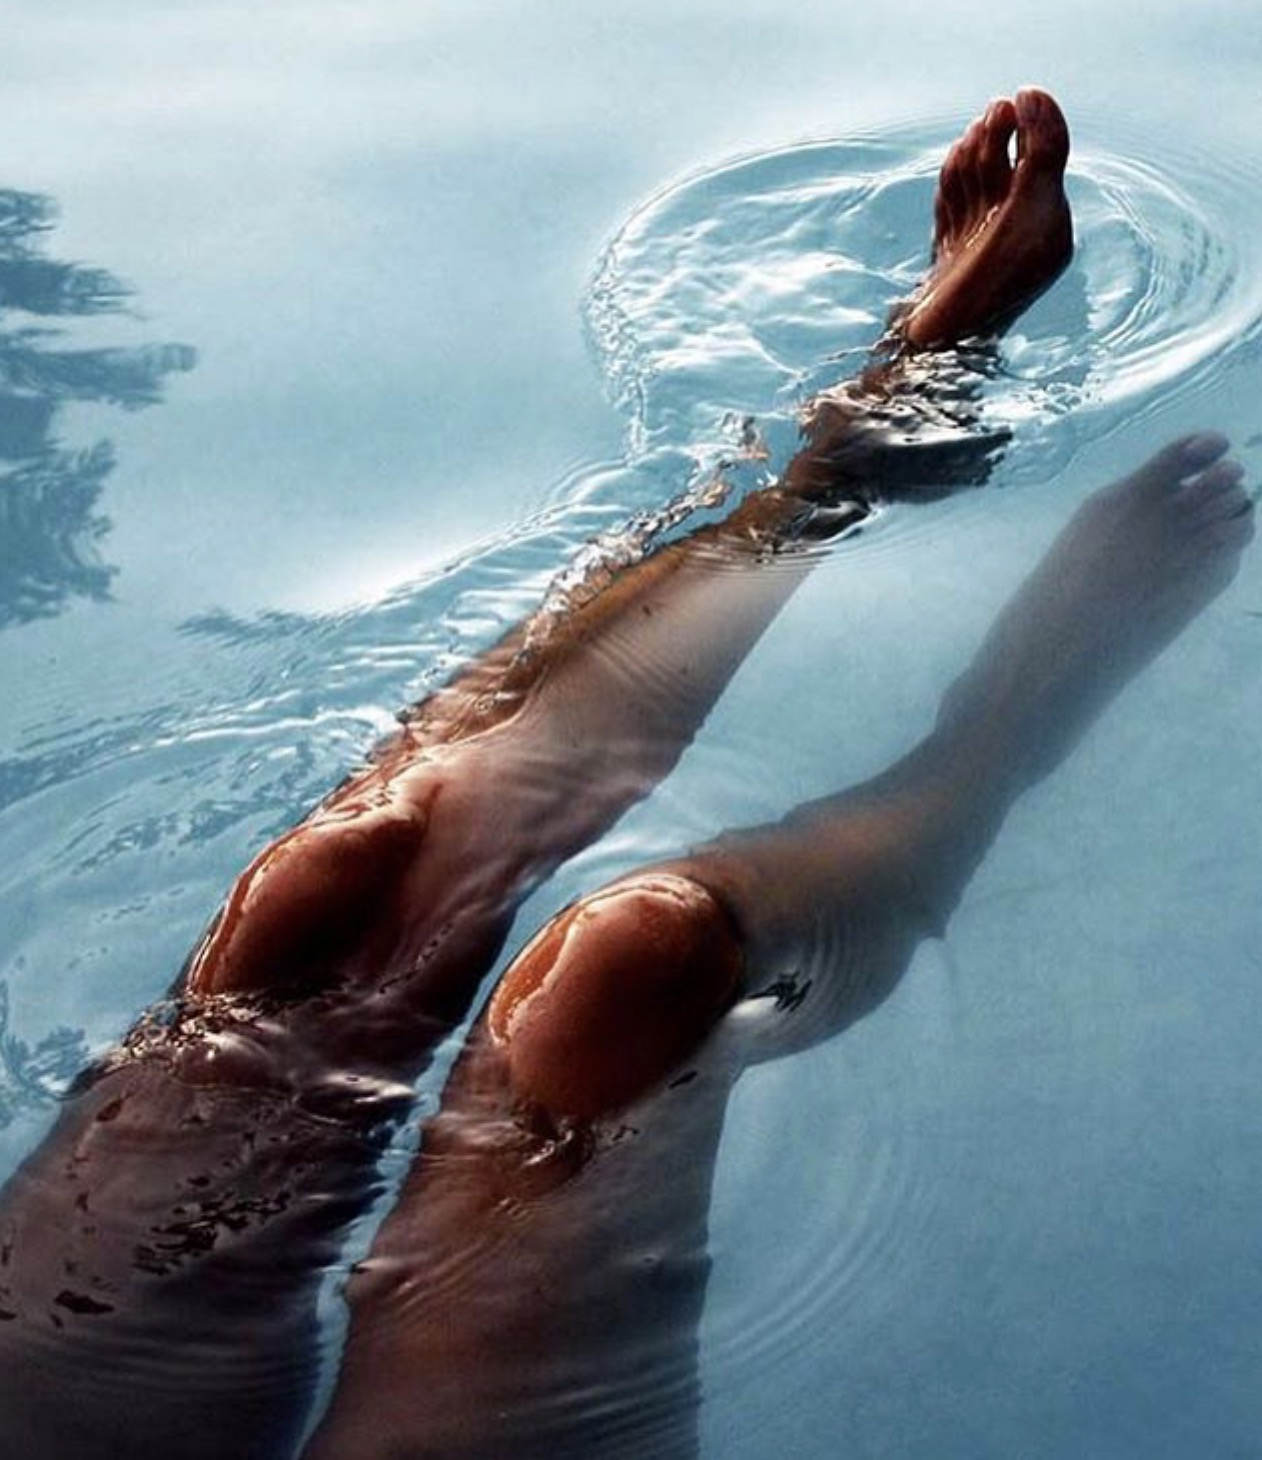 A person's legs floating in water.